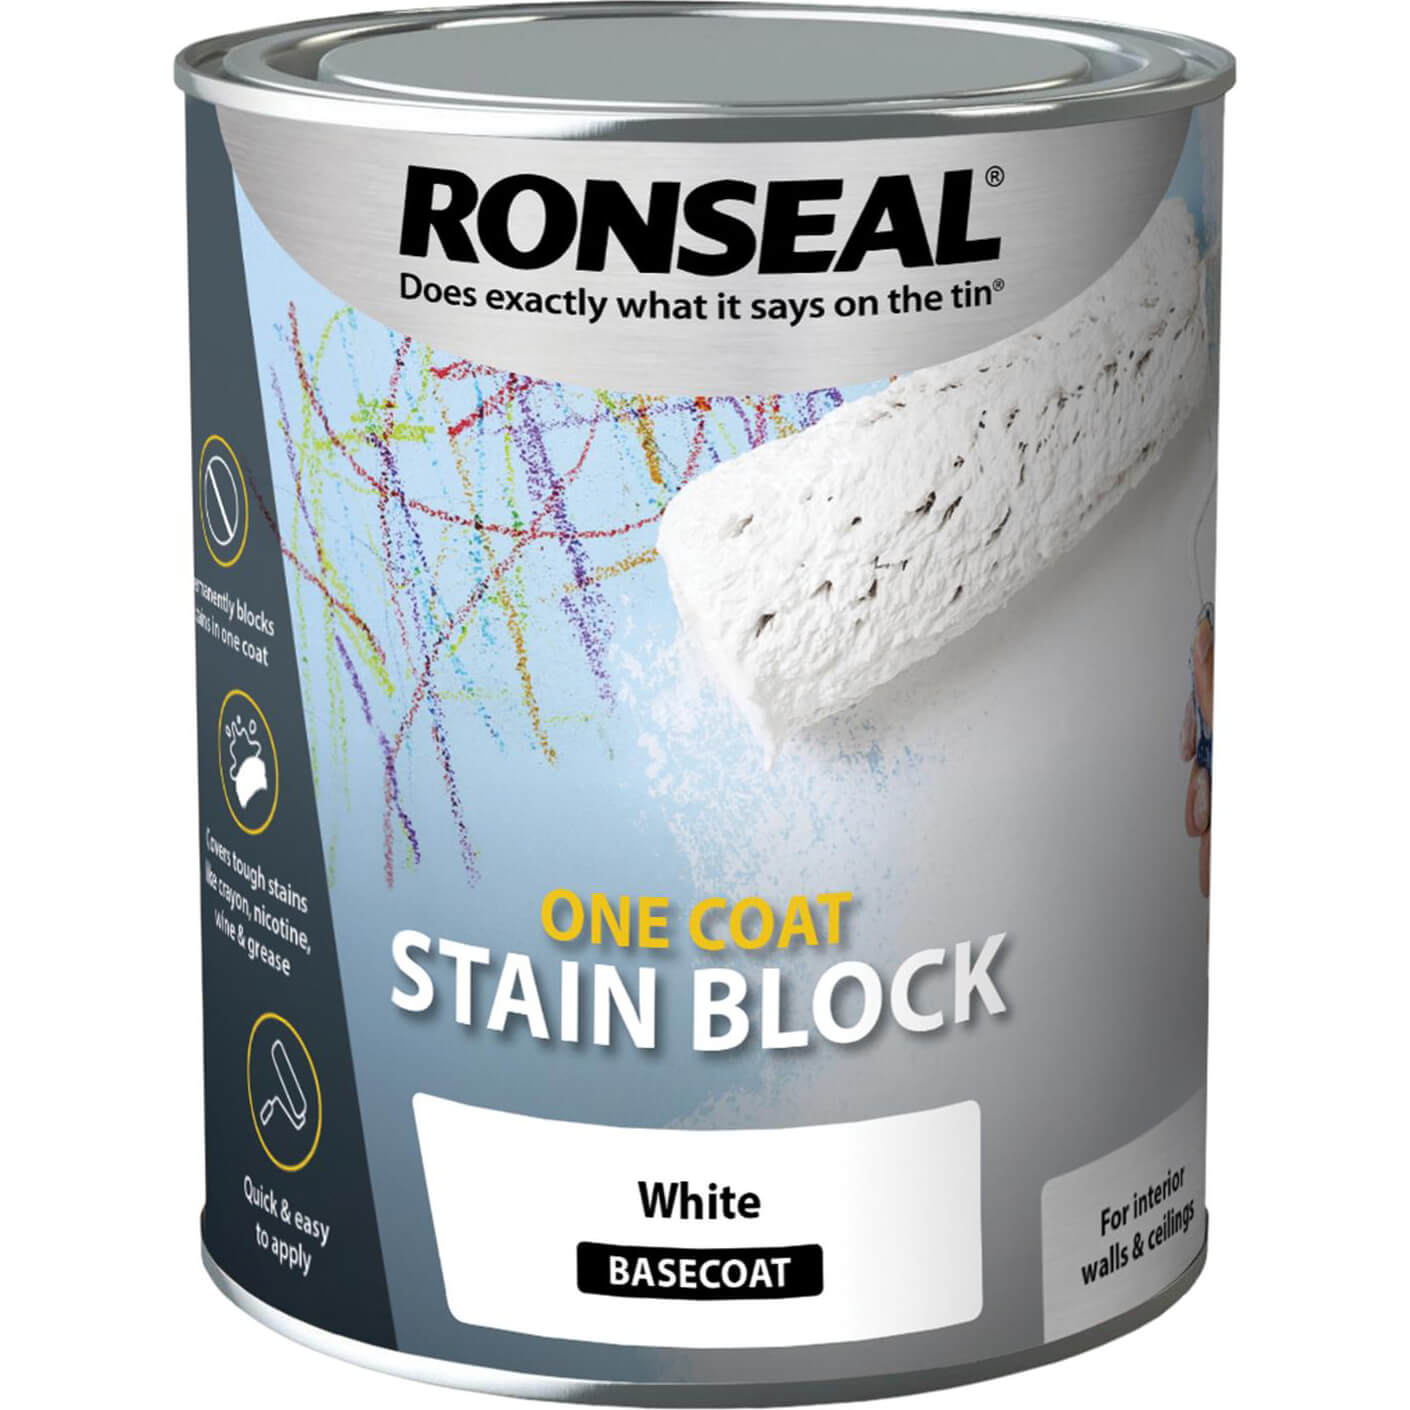 Image of Ronseal One Coat Stain Block Paint White 2.5l